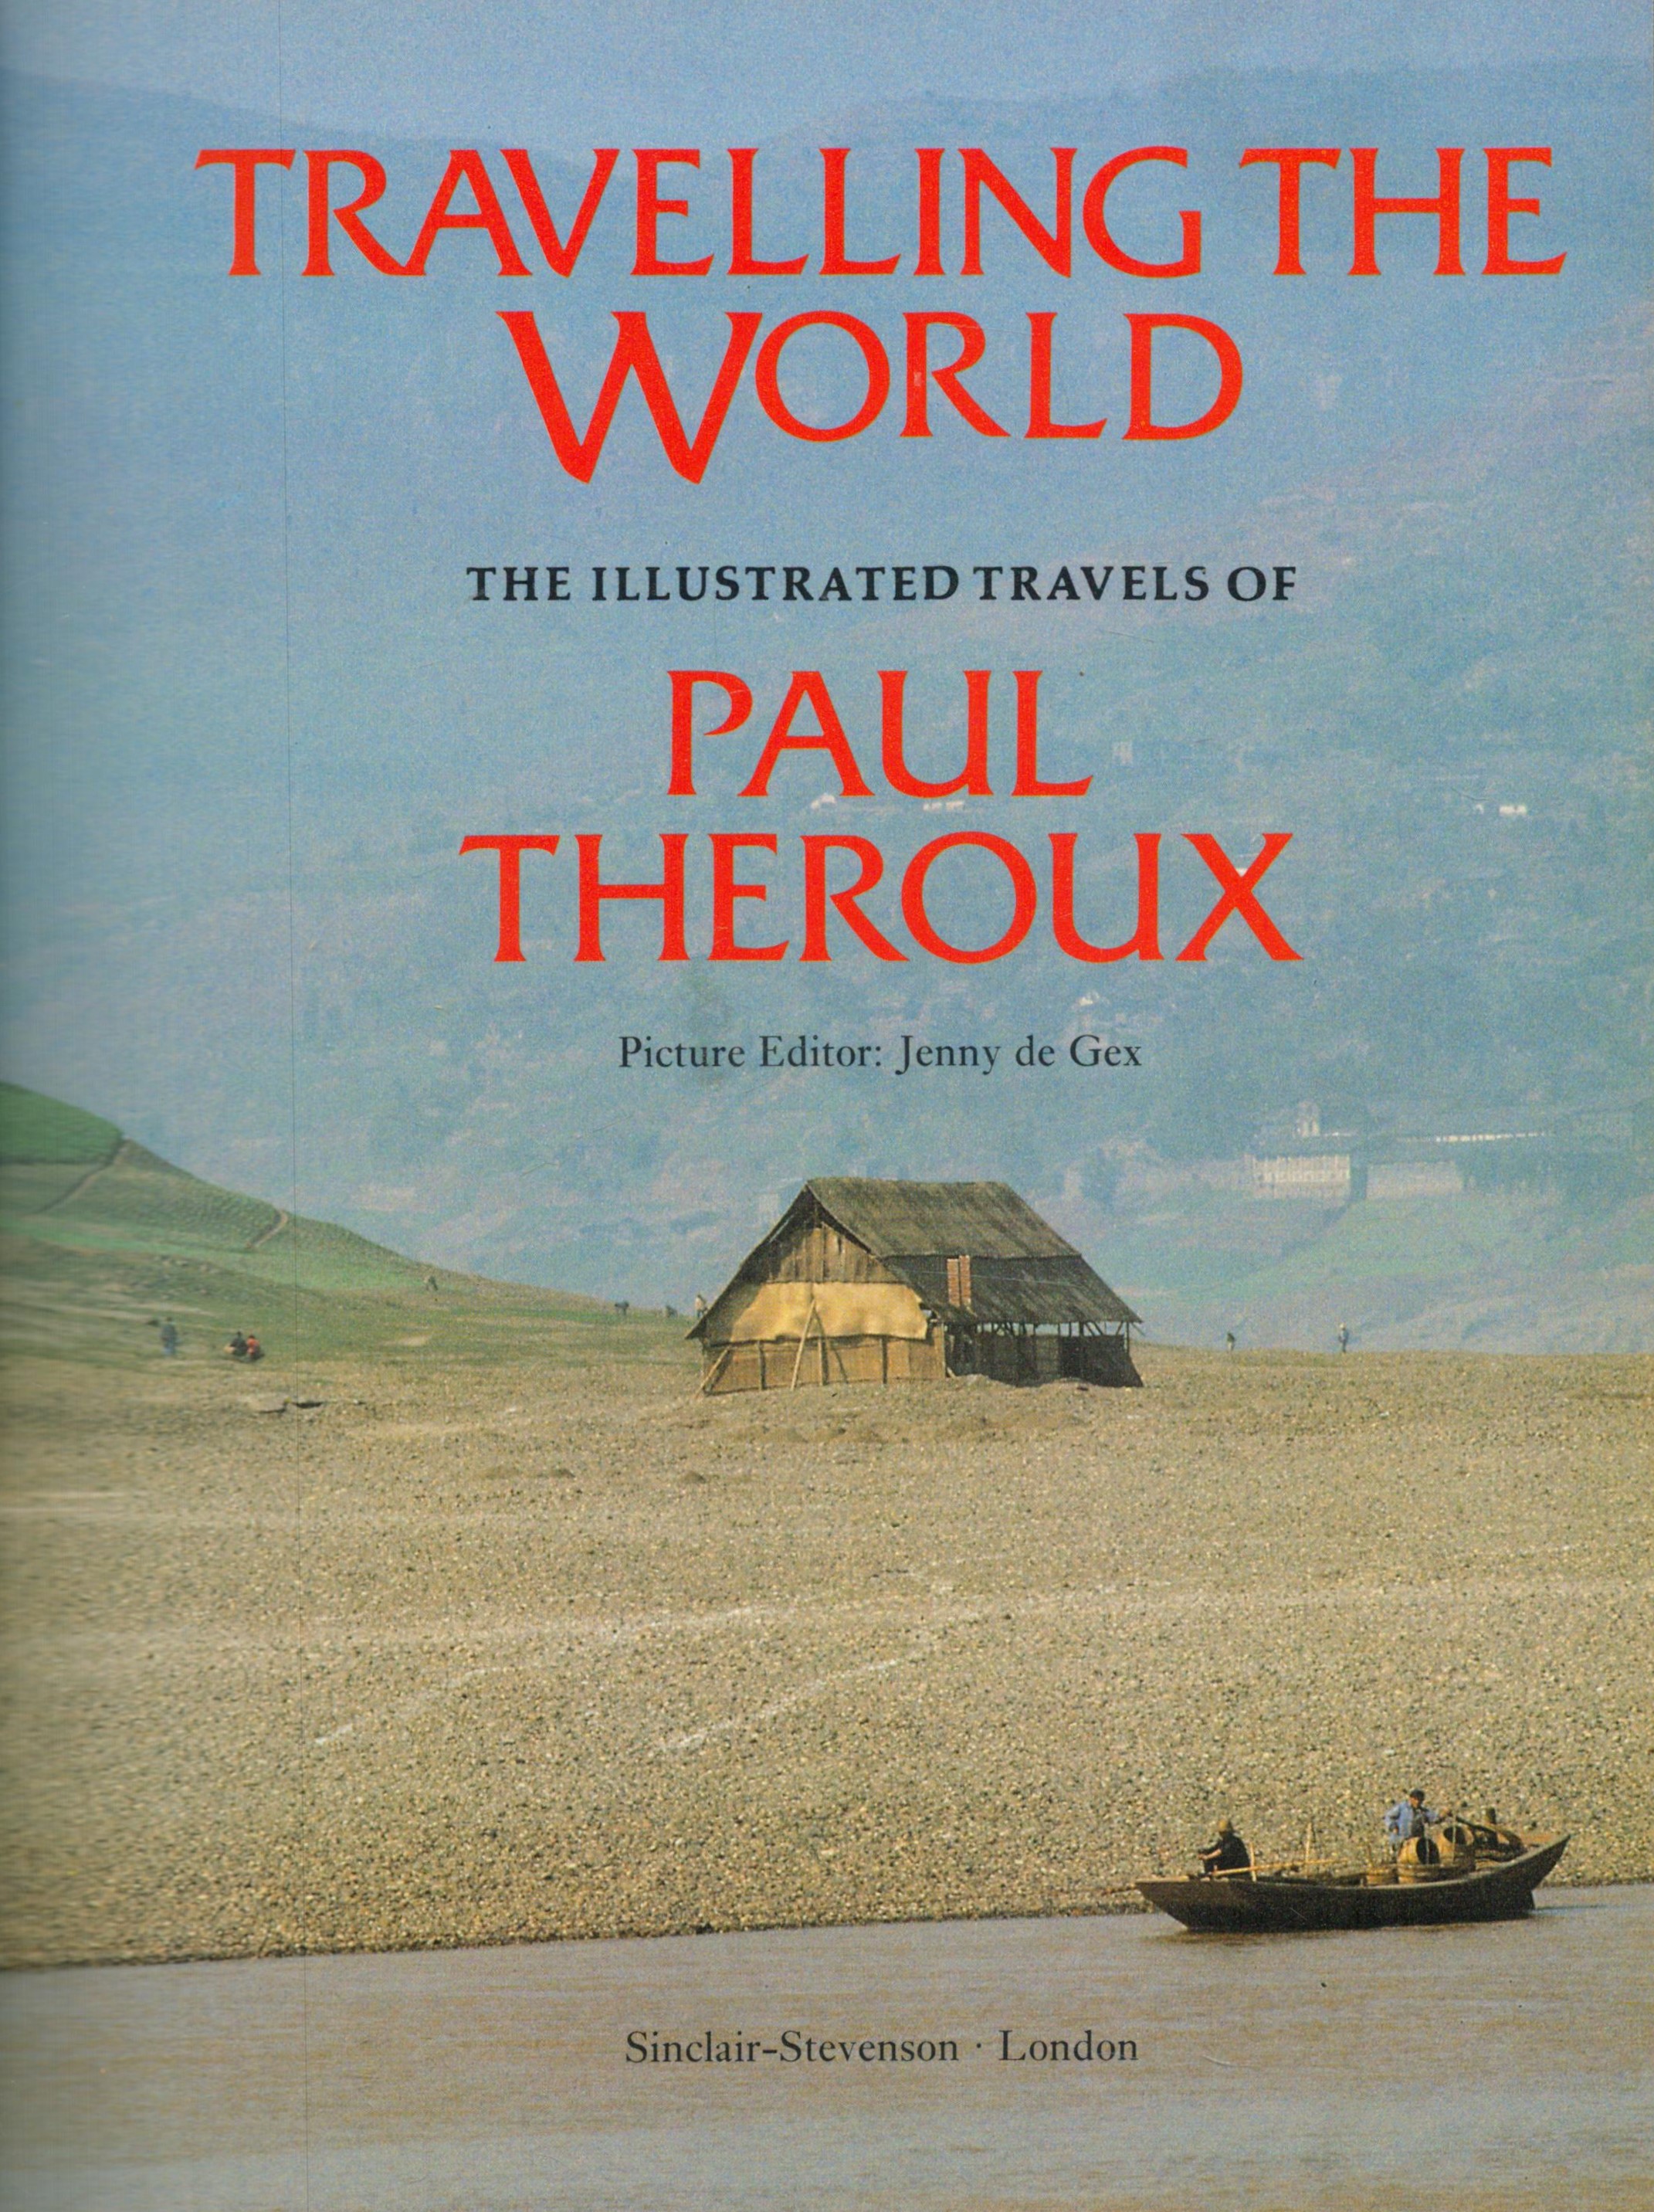 Travelling the World. The illustrated travels of Paul Theroux. Published by Sinclair-Stevenson. - Image 2 of 3